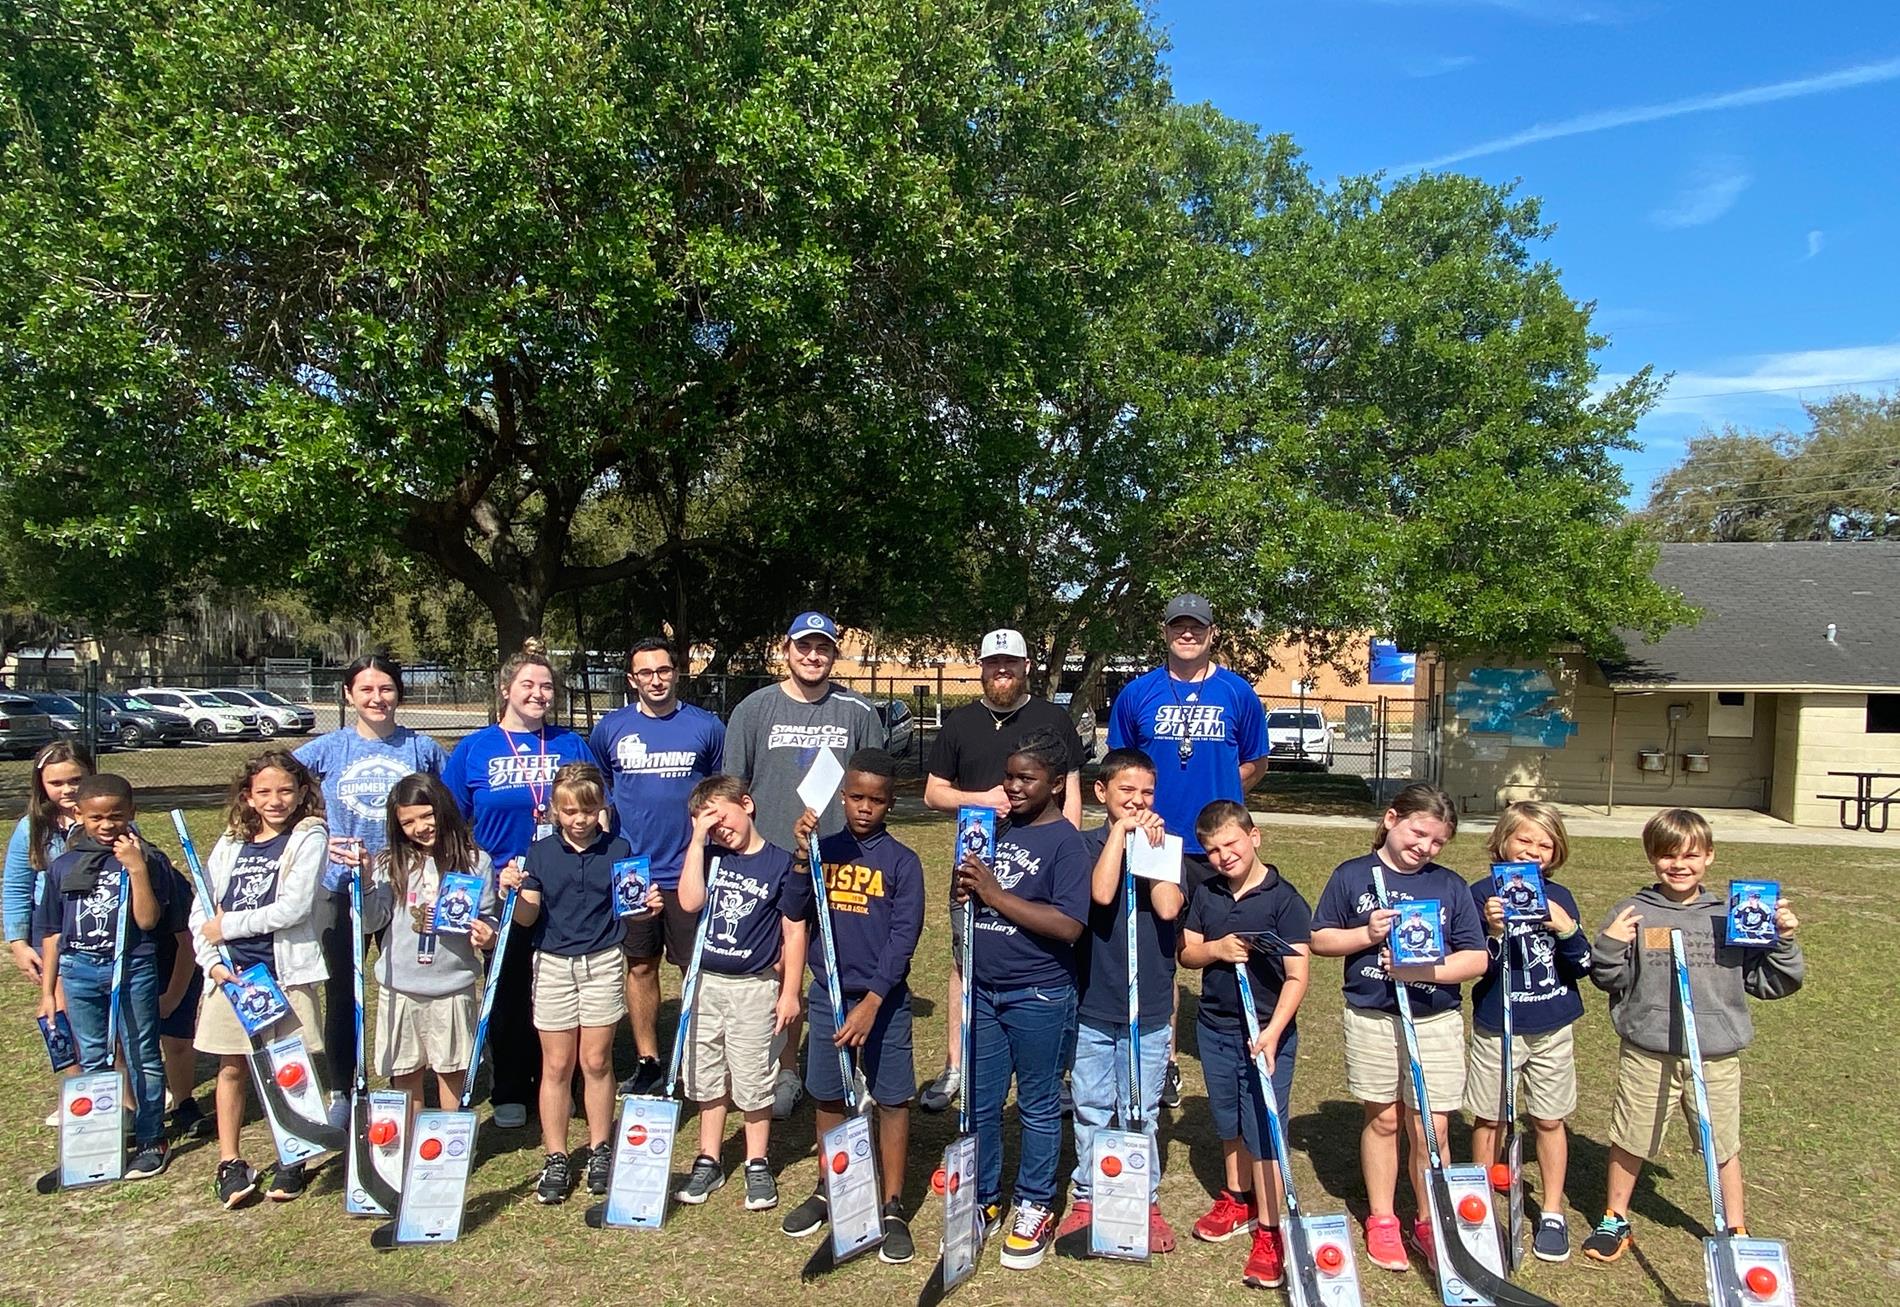 2nd grade students with the Street Hockey Team